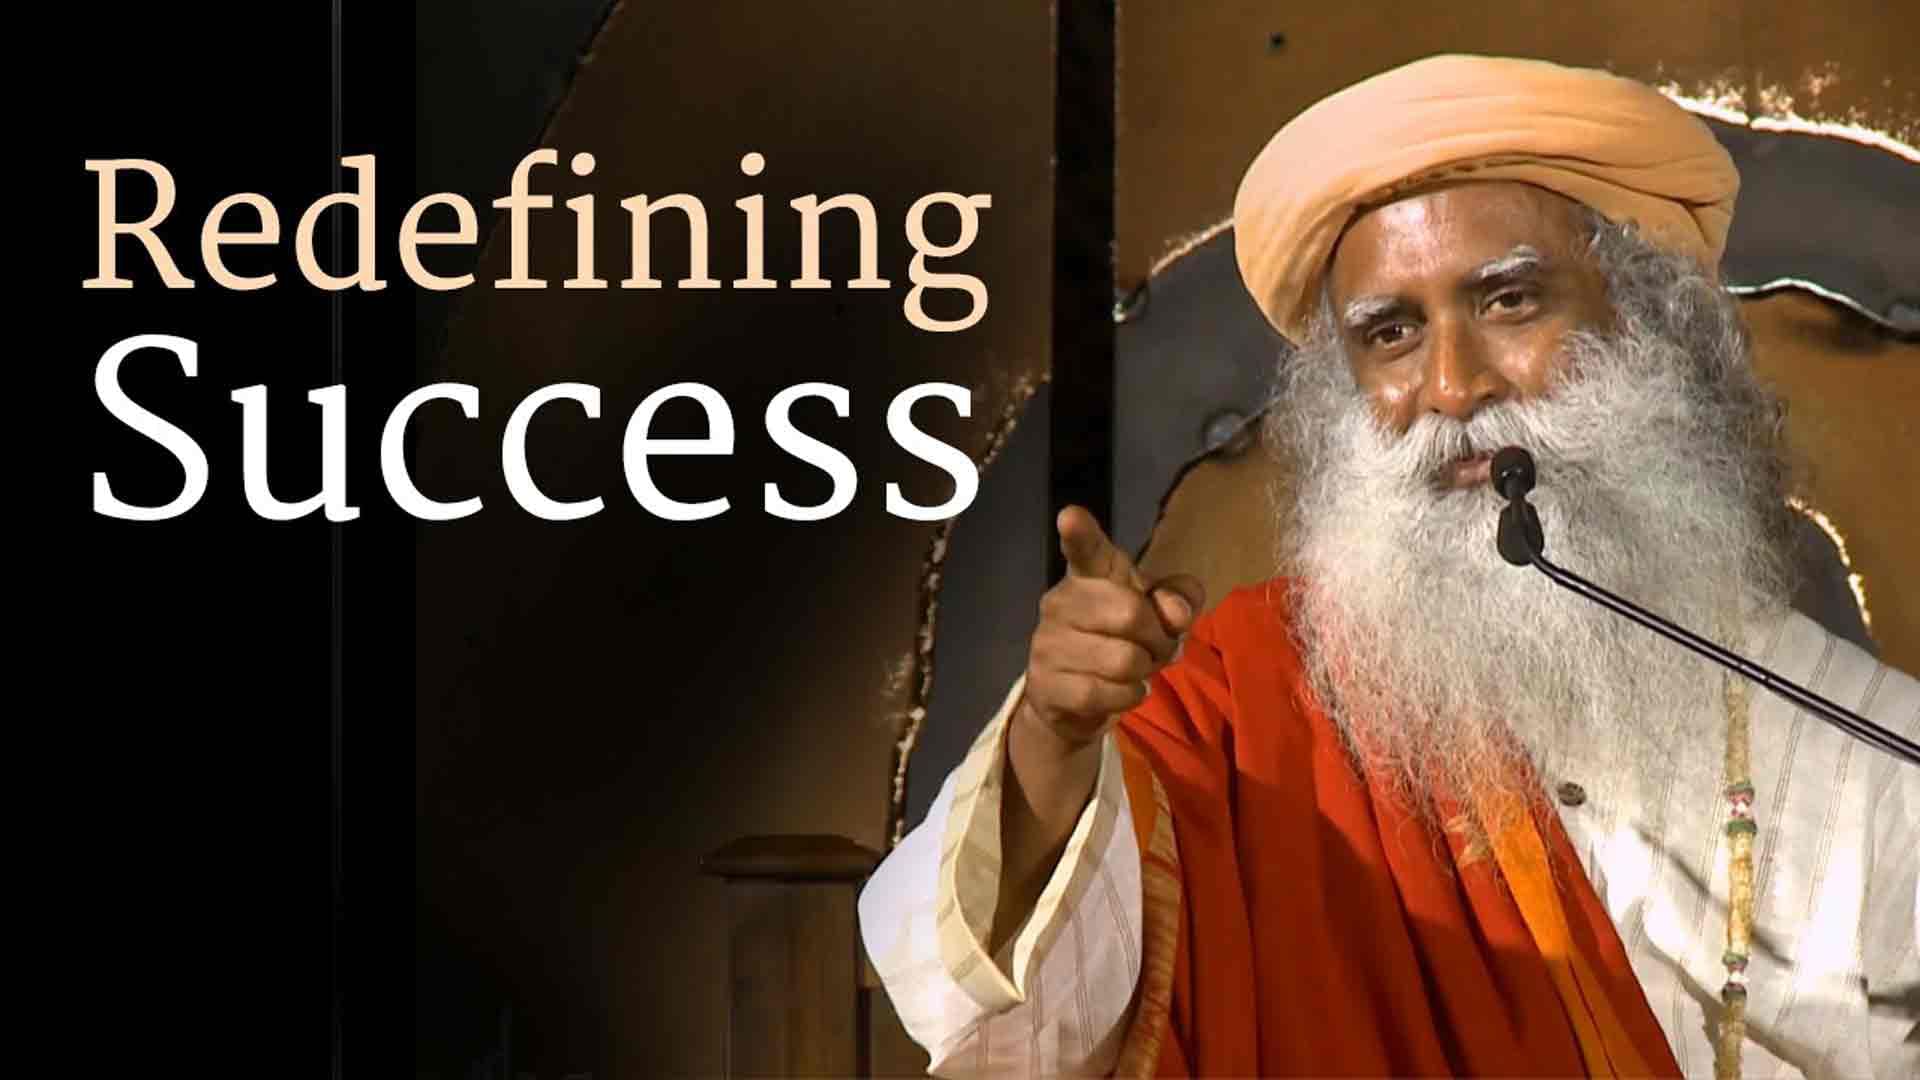 Sadhguru Wellness TV:Amazon.in:Appstore for Android